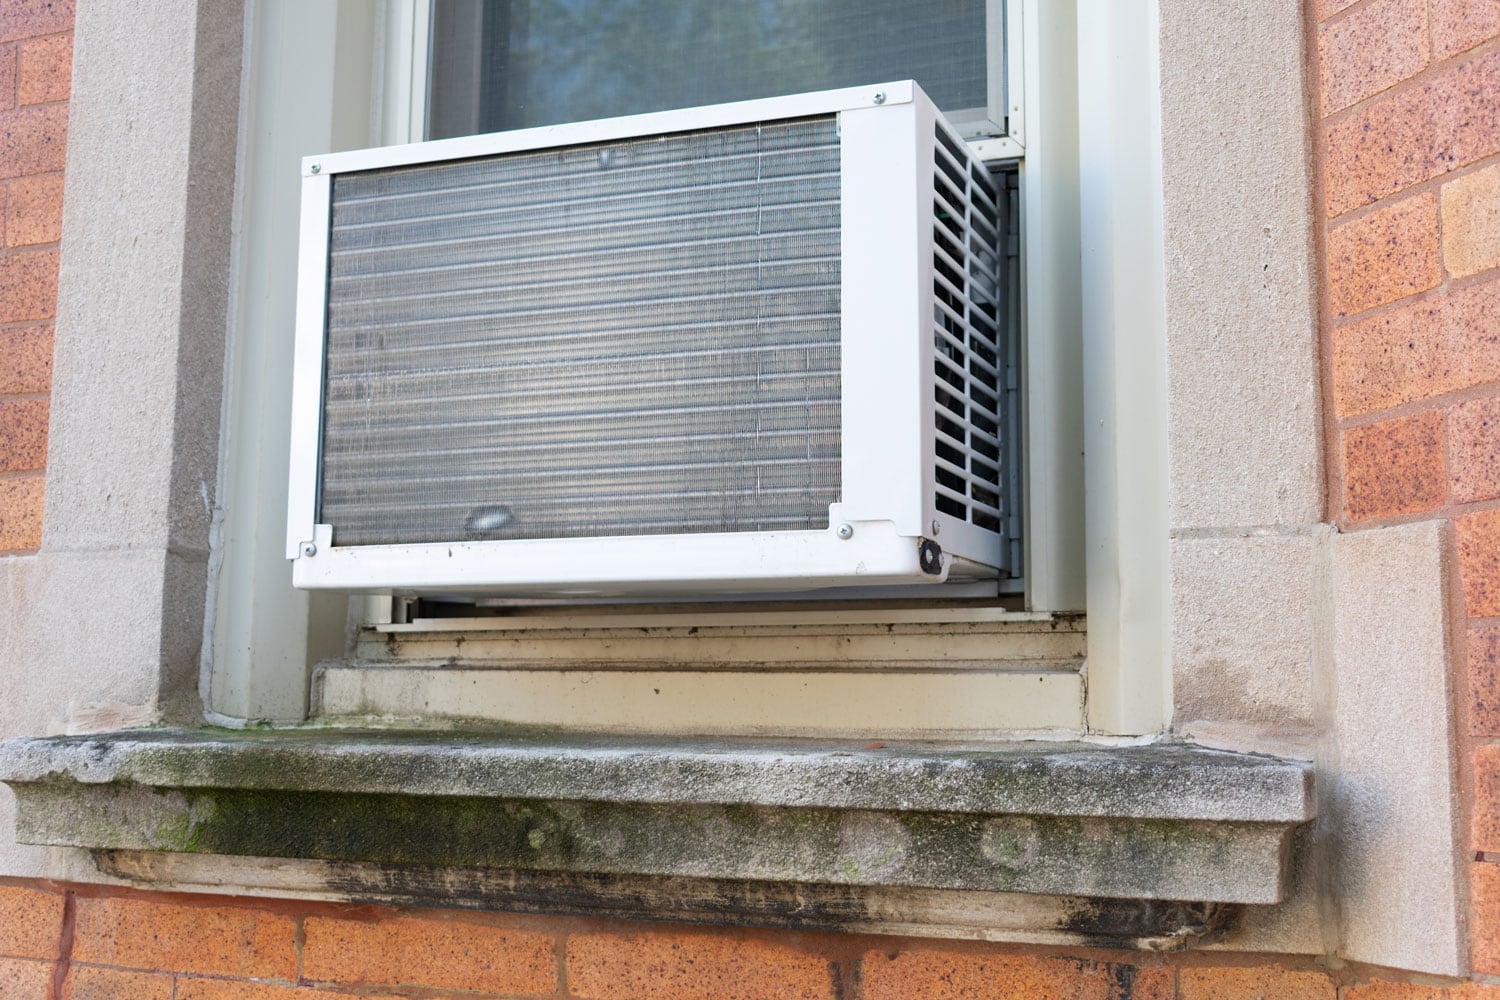 A window air conditioner for a small city apartment